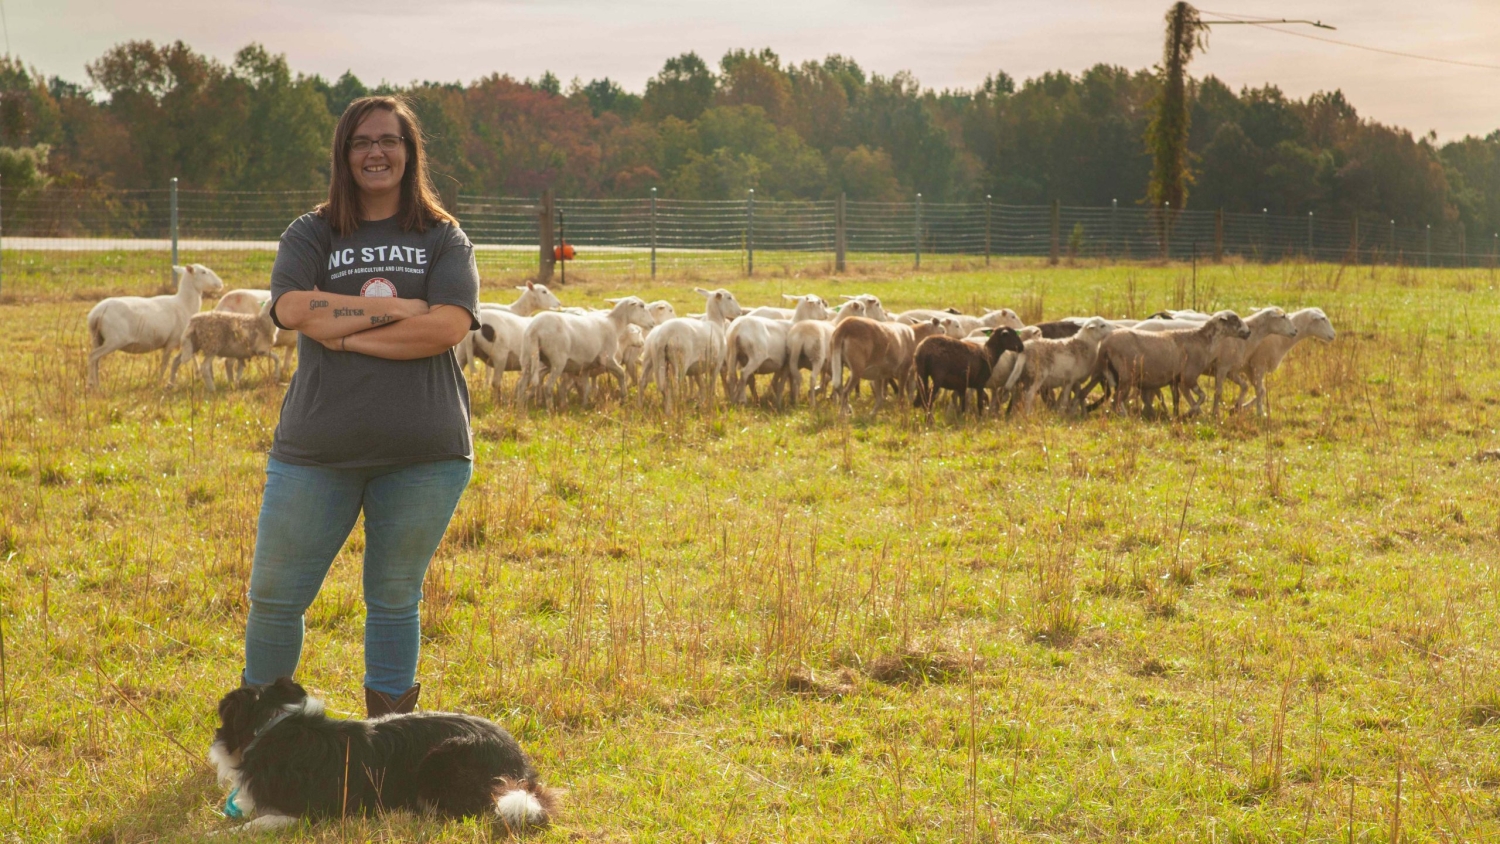 Sara Kidd stands with sheep behind her